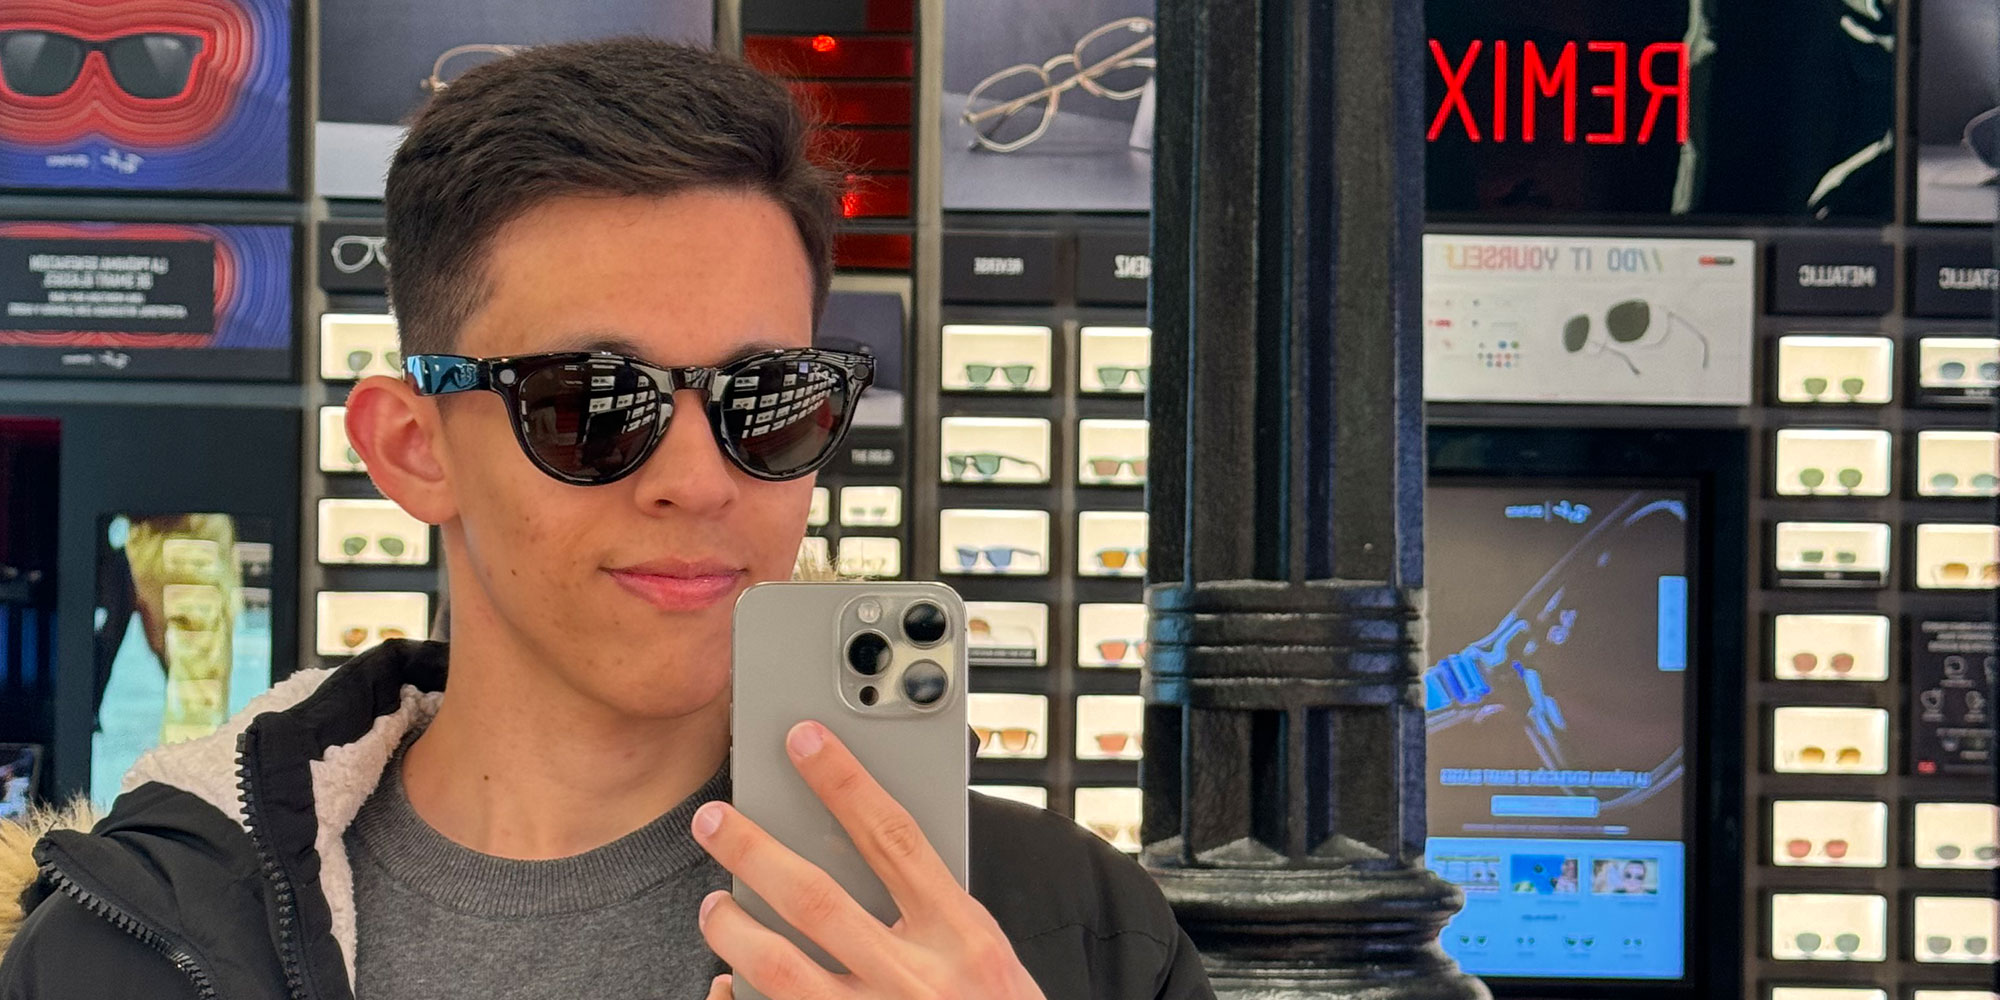 Ray-Ban Meta glasses convinced me to believe in smart glasses